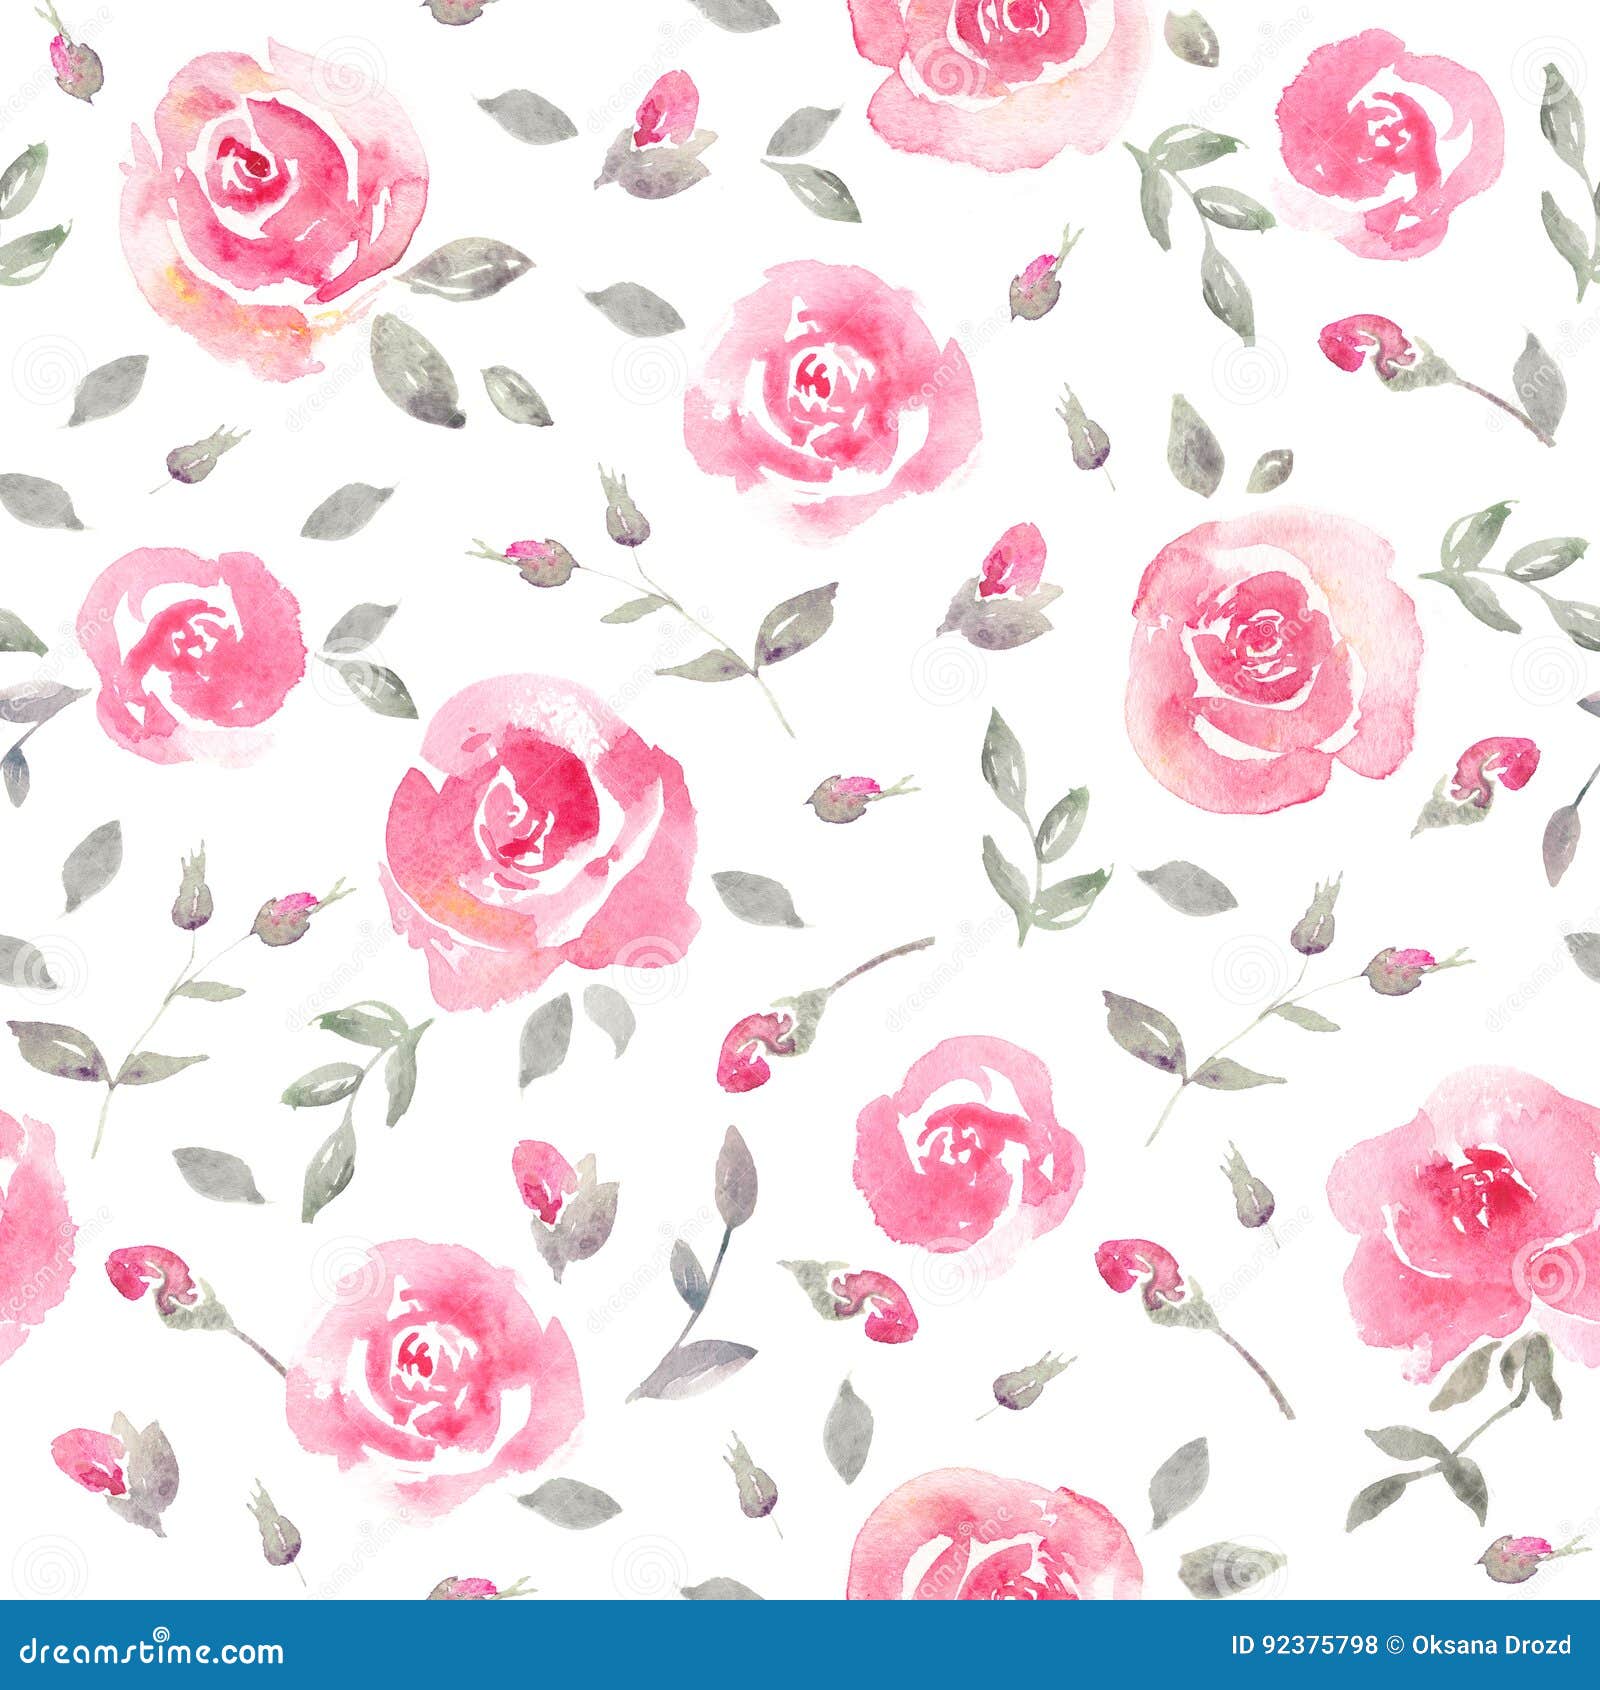 Romantic Pink Roses - Floral Seamless Pattern. Stock Illustration ...